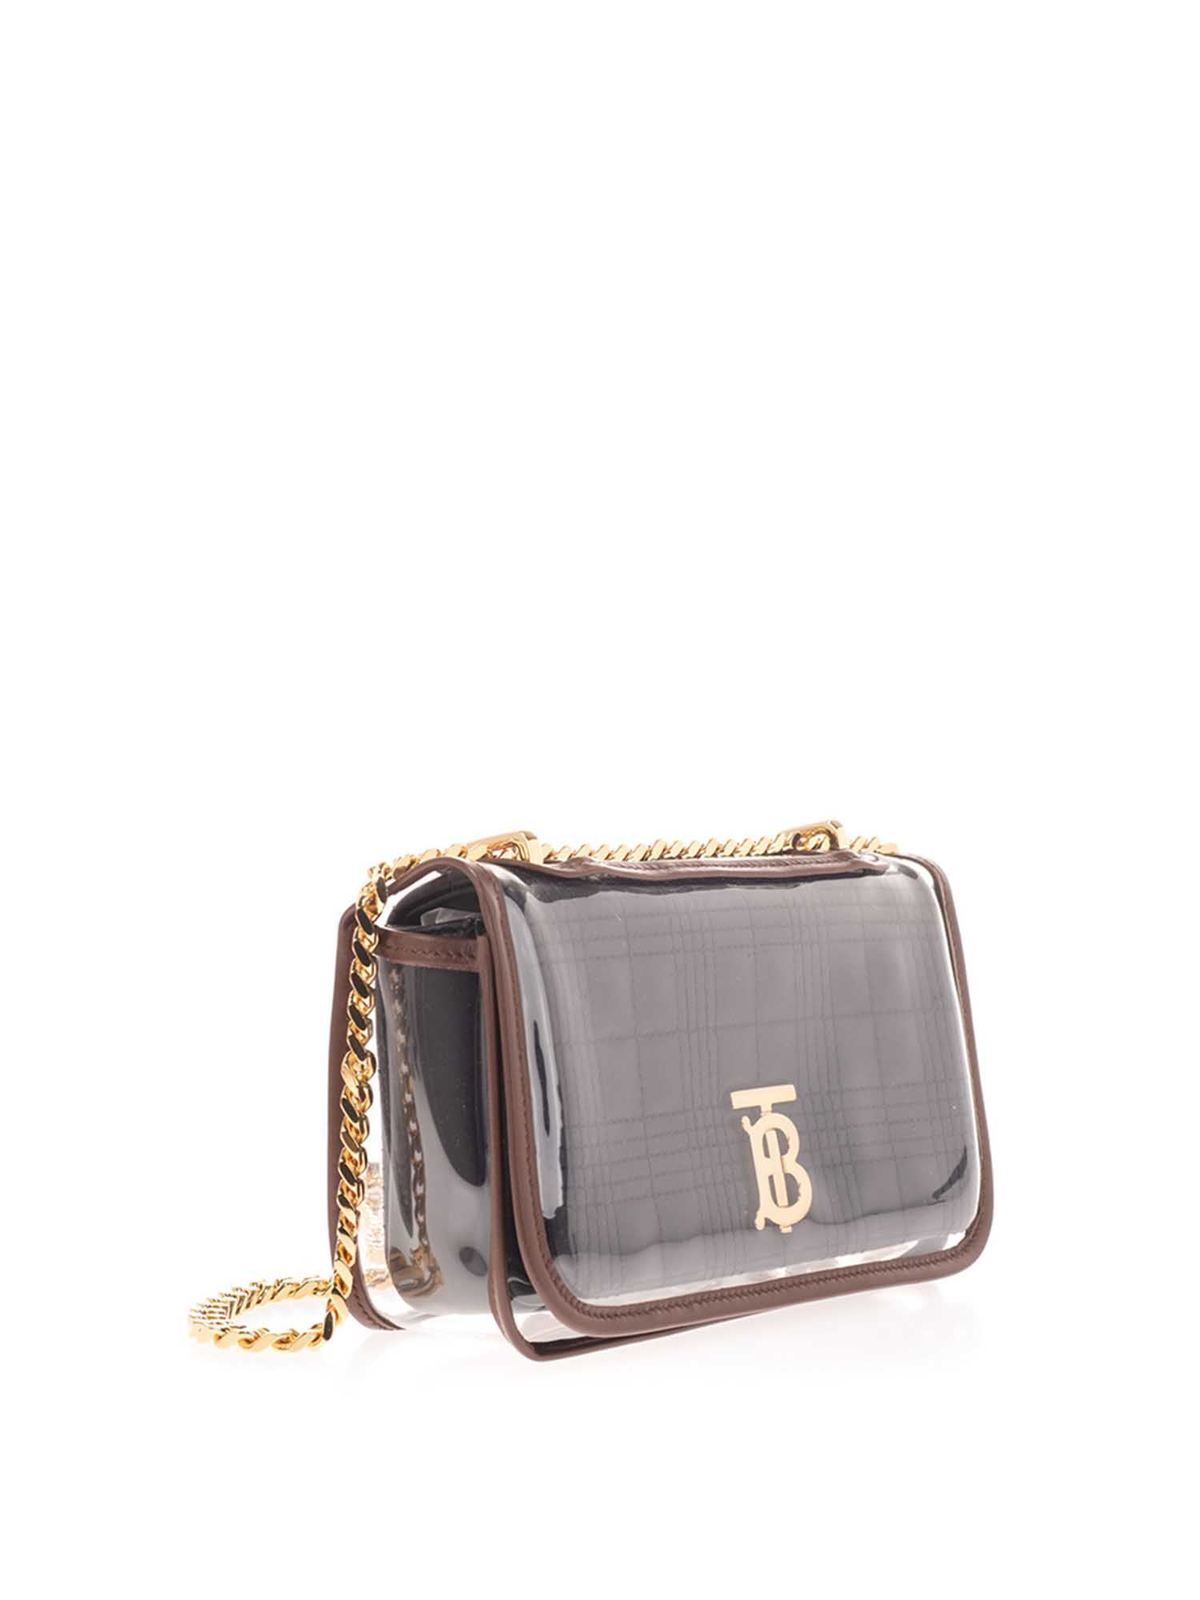 Cross body bags Burberry - Lola mini with transparent cover bag in black -  8032038